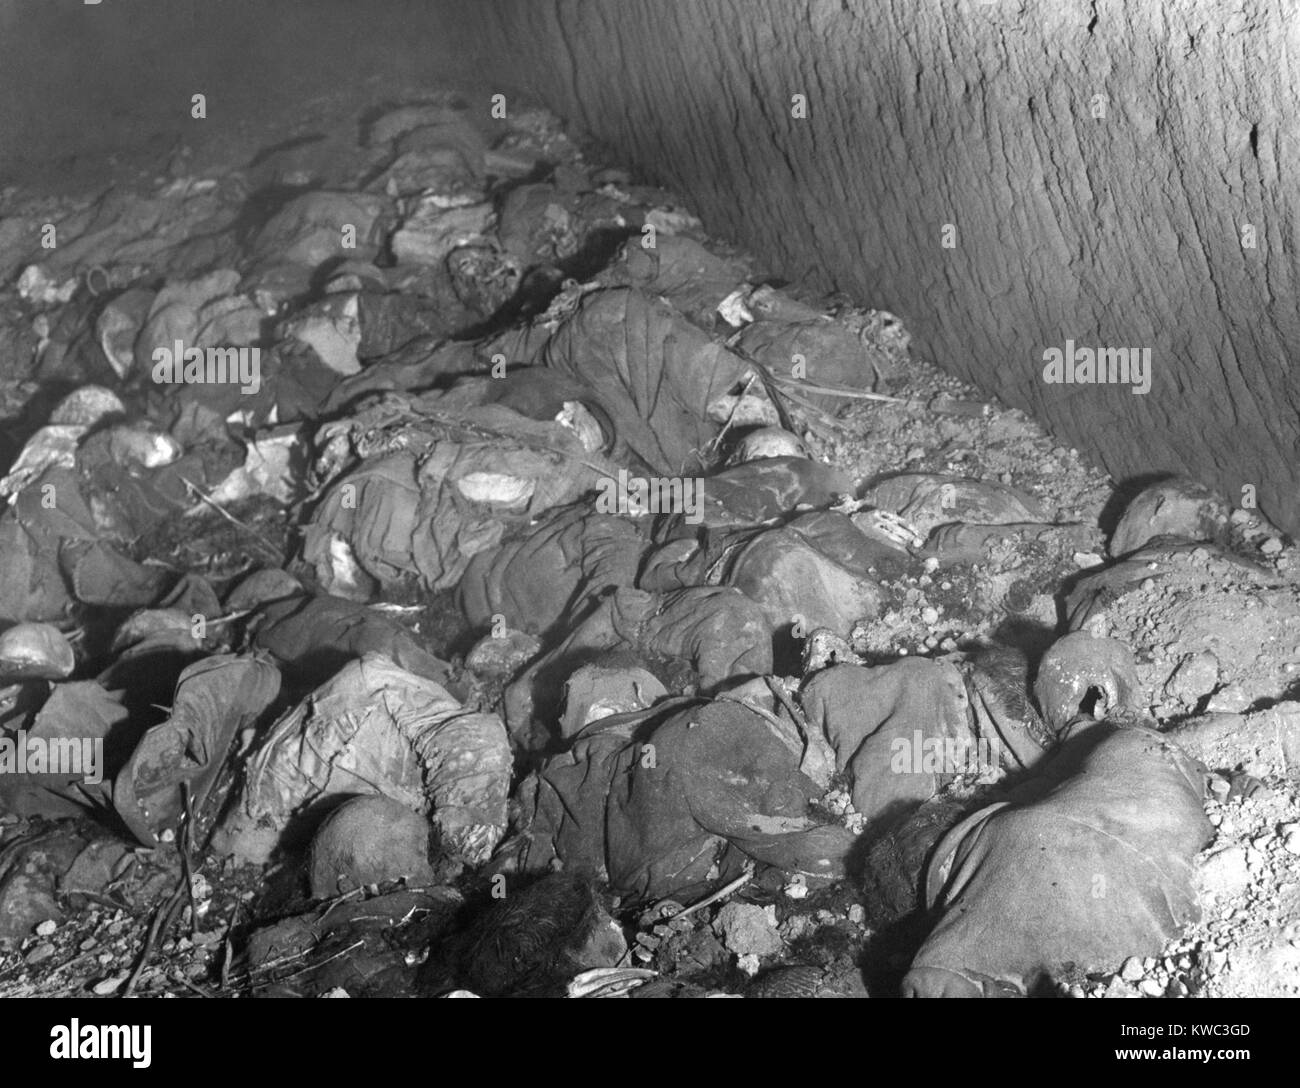 Bodies of victims of the Ardeatine Massacre in the Roman catacomb where they were shot. 320 Italians hostages were murdered on March 24, 1944, the day after partisans killed of 32 SS Soldiers in Rome during World War 2. The 1973 film, MASSACRE IN ROME, was based on the reprisal and starred Marcello Mastroianni and Richard Burton. (BSLOC 2015 13 95) Stock Photo